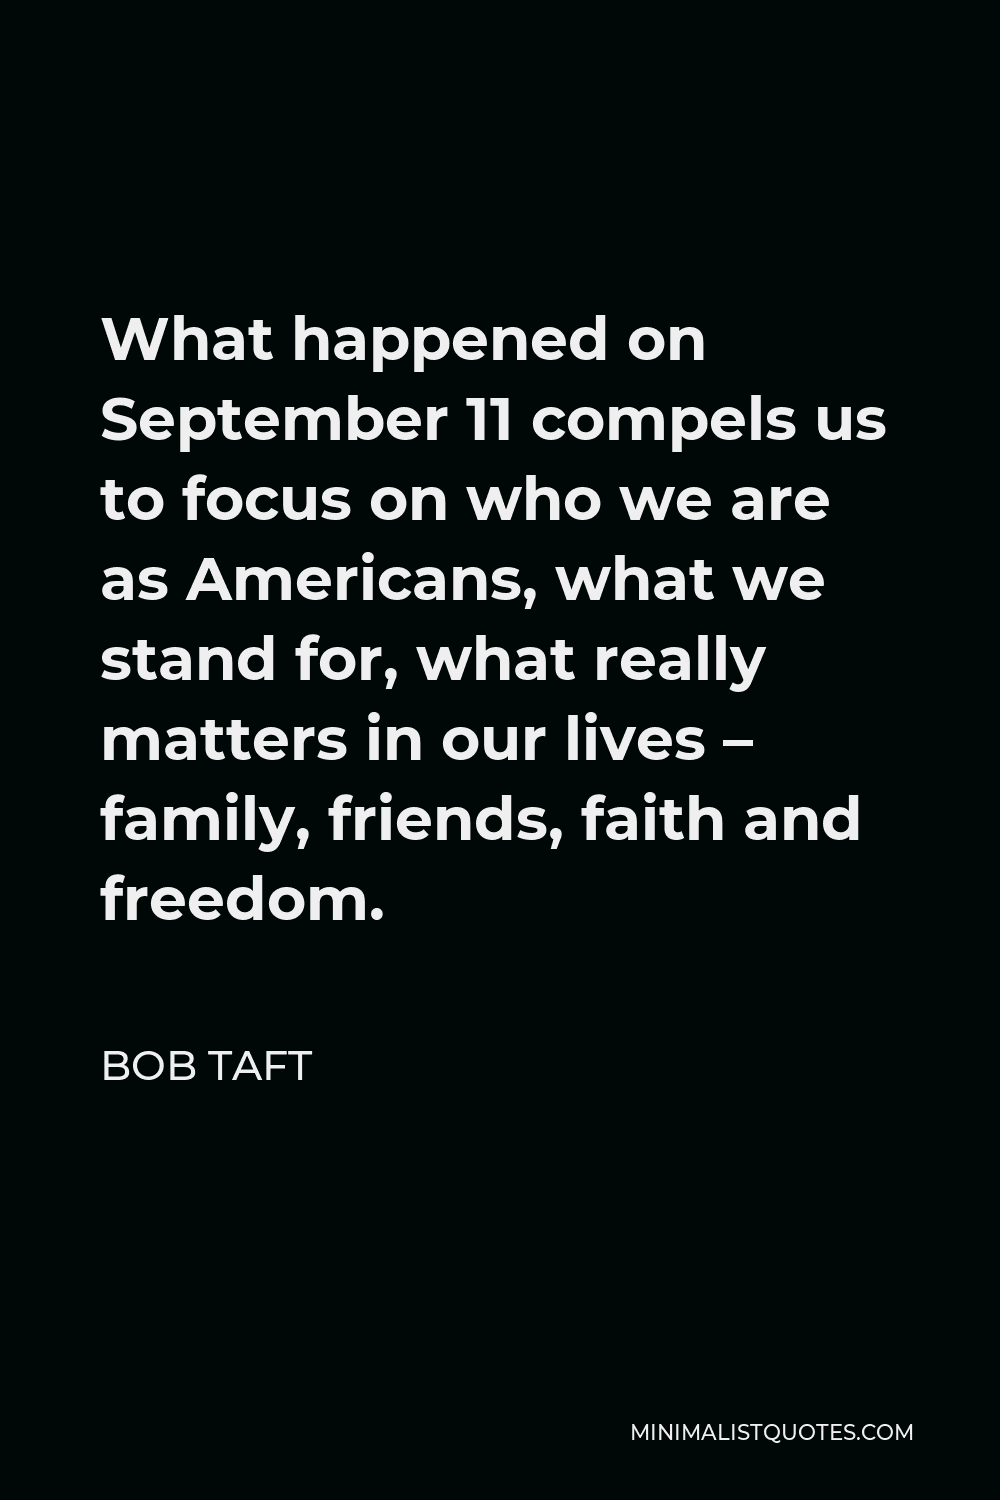 Bob Taft Quote - What happened on September 11 compels us to focus on who we are as Americans, what we stand for, what really matters in our lives – family, friends, faith and freedom.